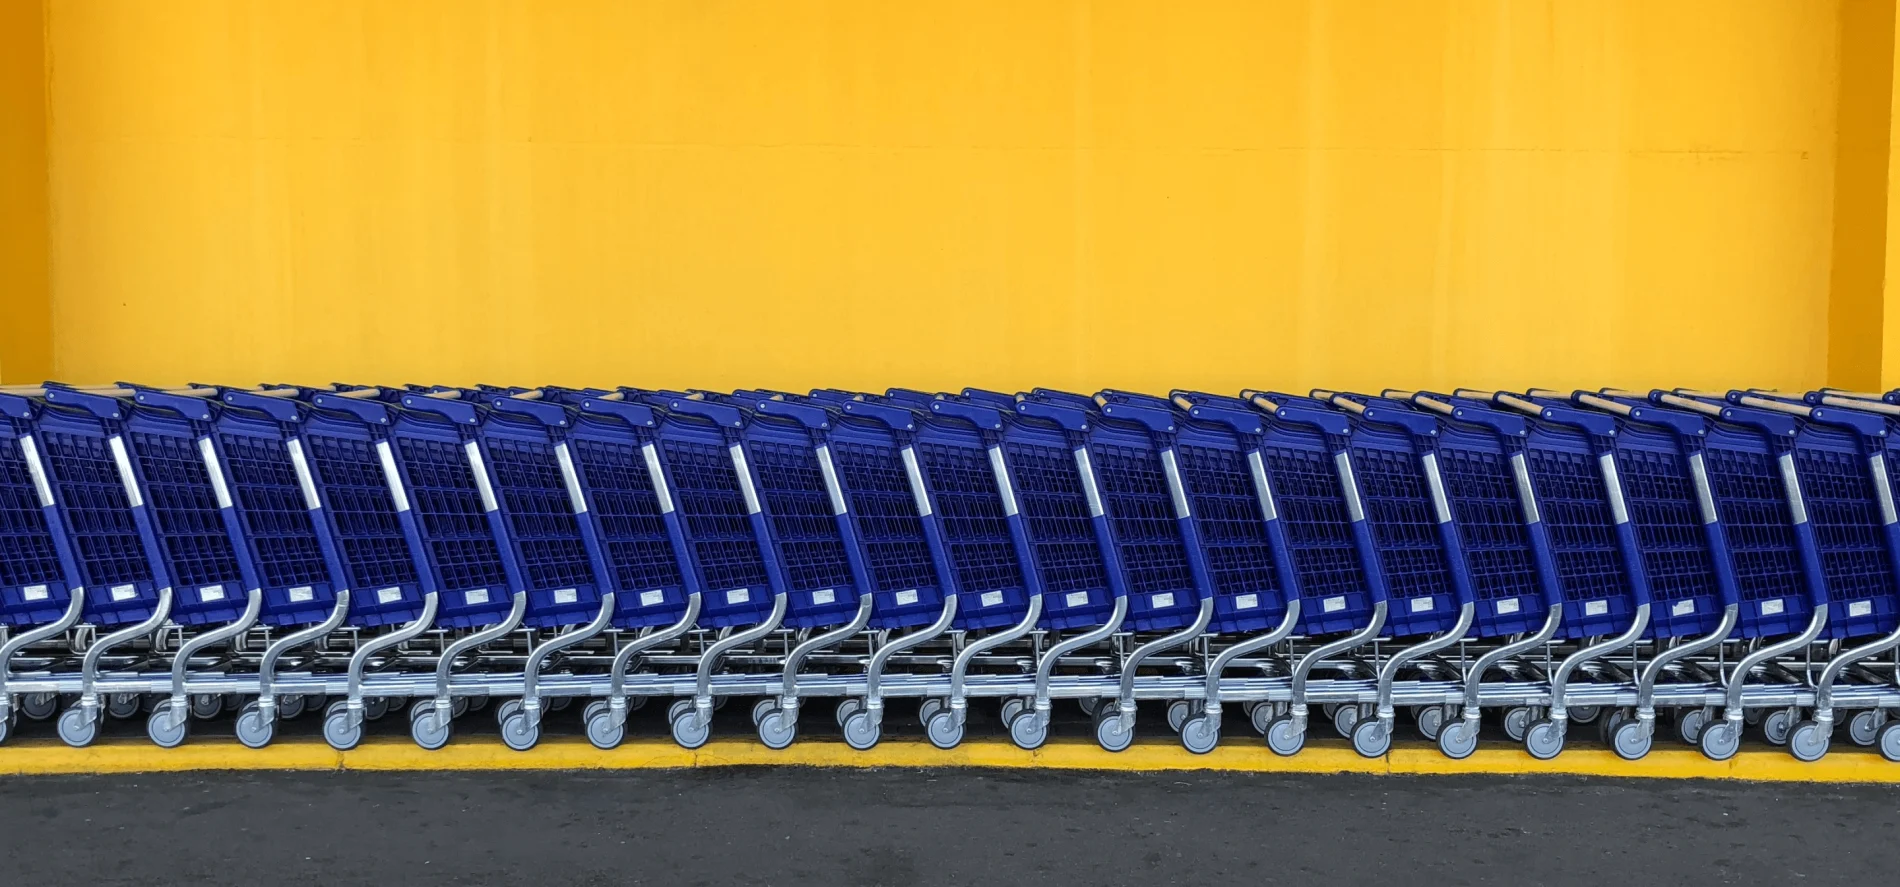 image of a long line of blue shopping carts with a yellow background